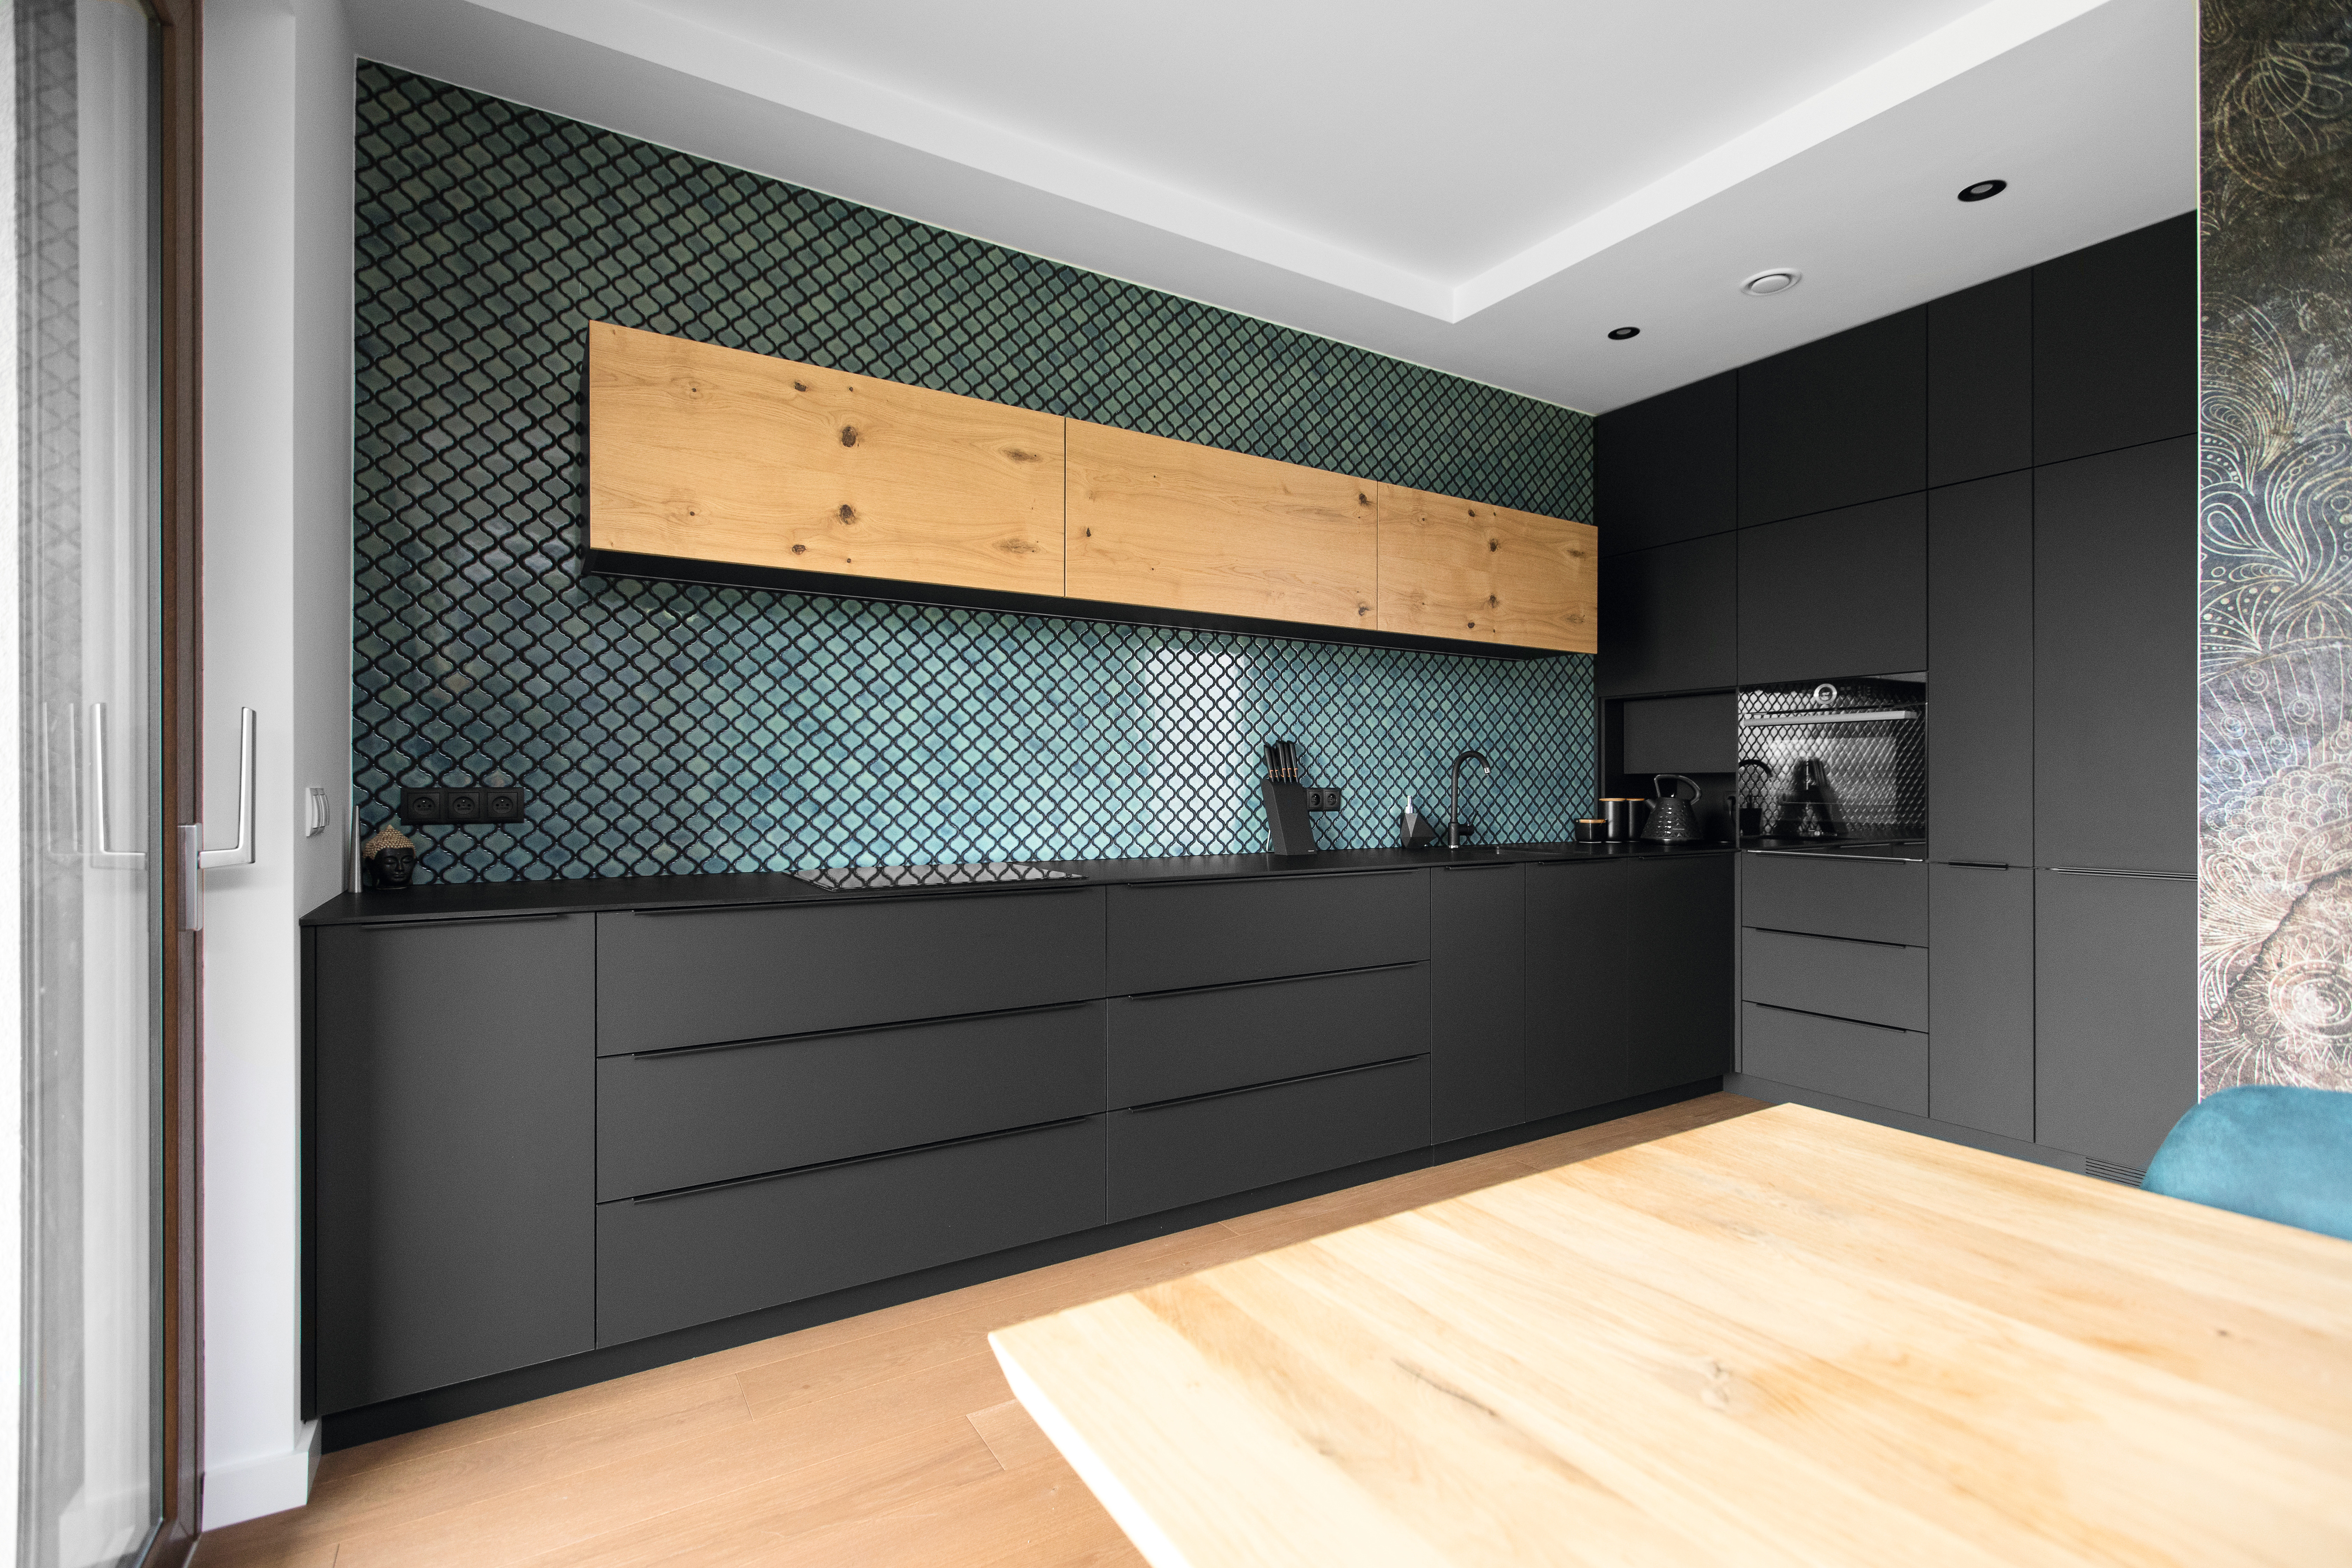 The matte black surface contrasts with a vivid backsplash and warm wood tones to create a cozy kitchen space.